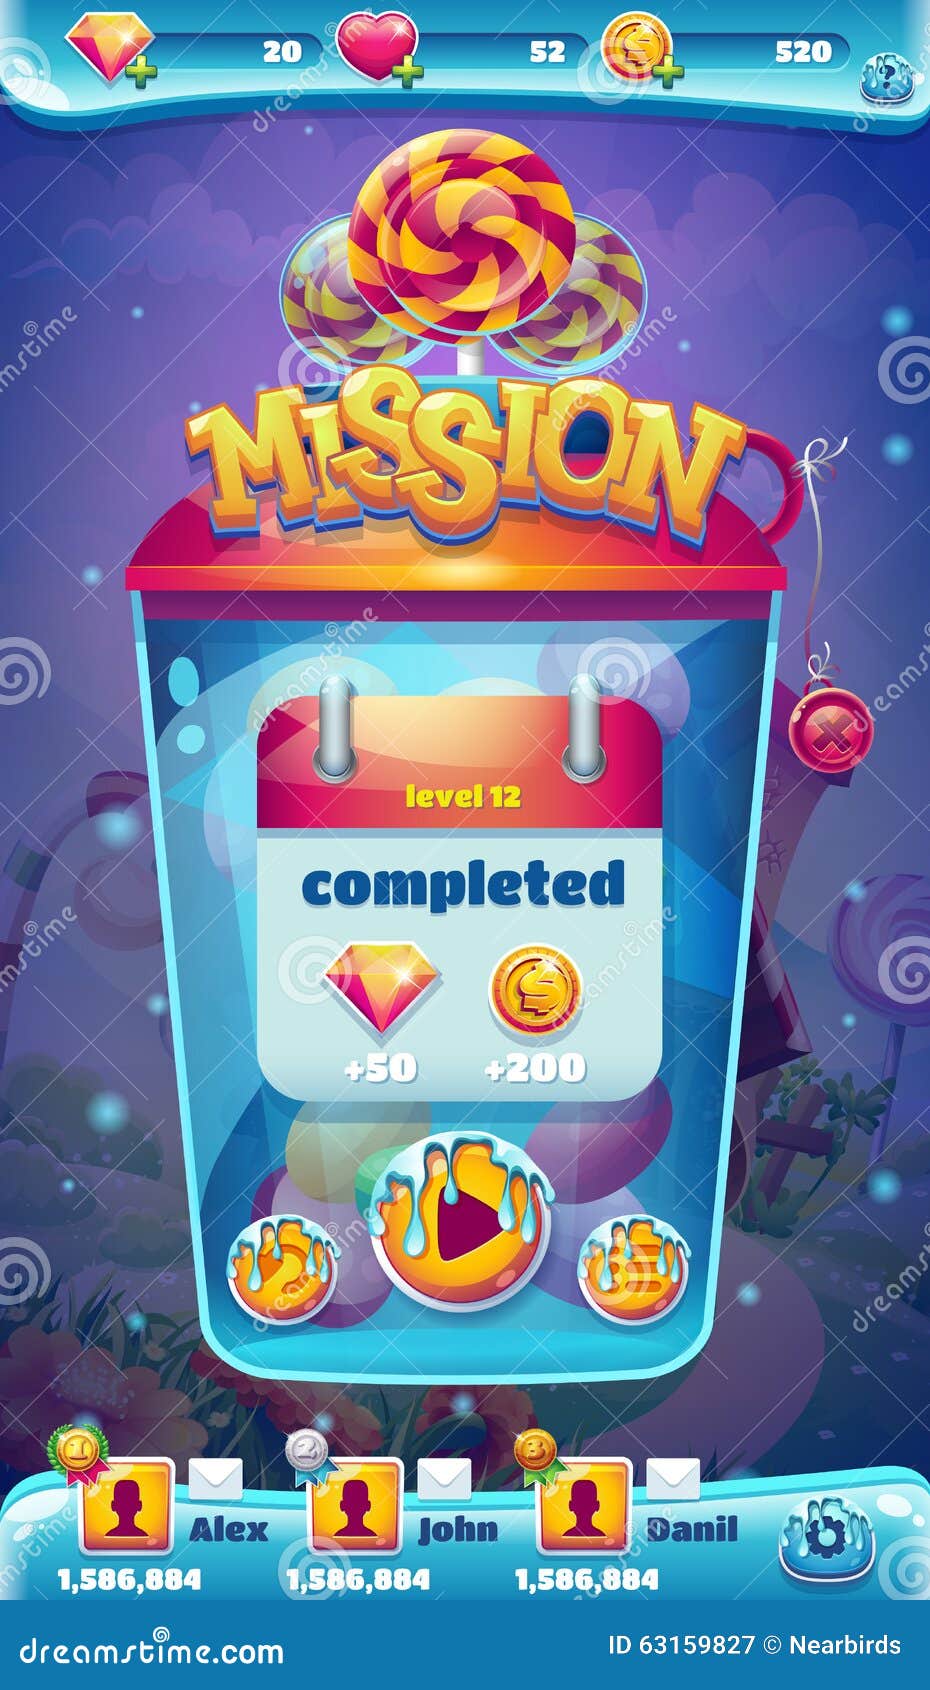 sweet world mobile gui mission completed window